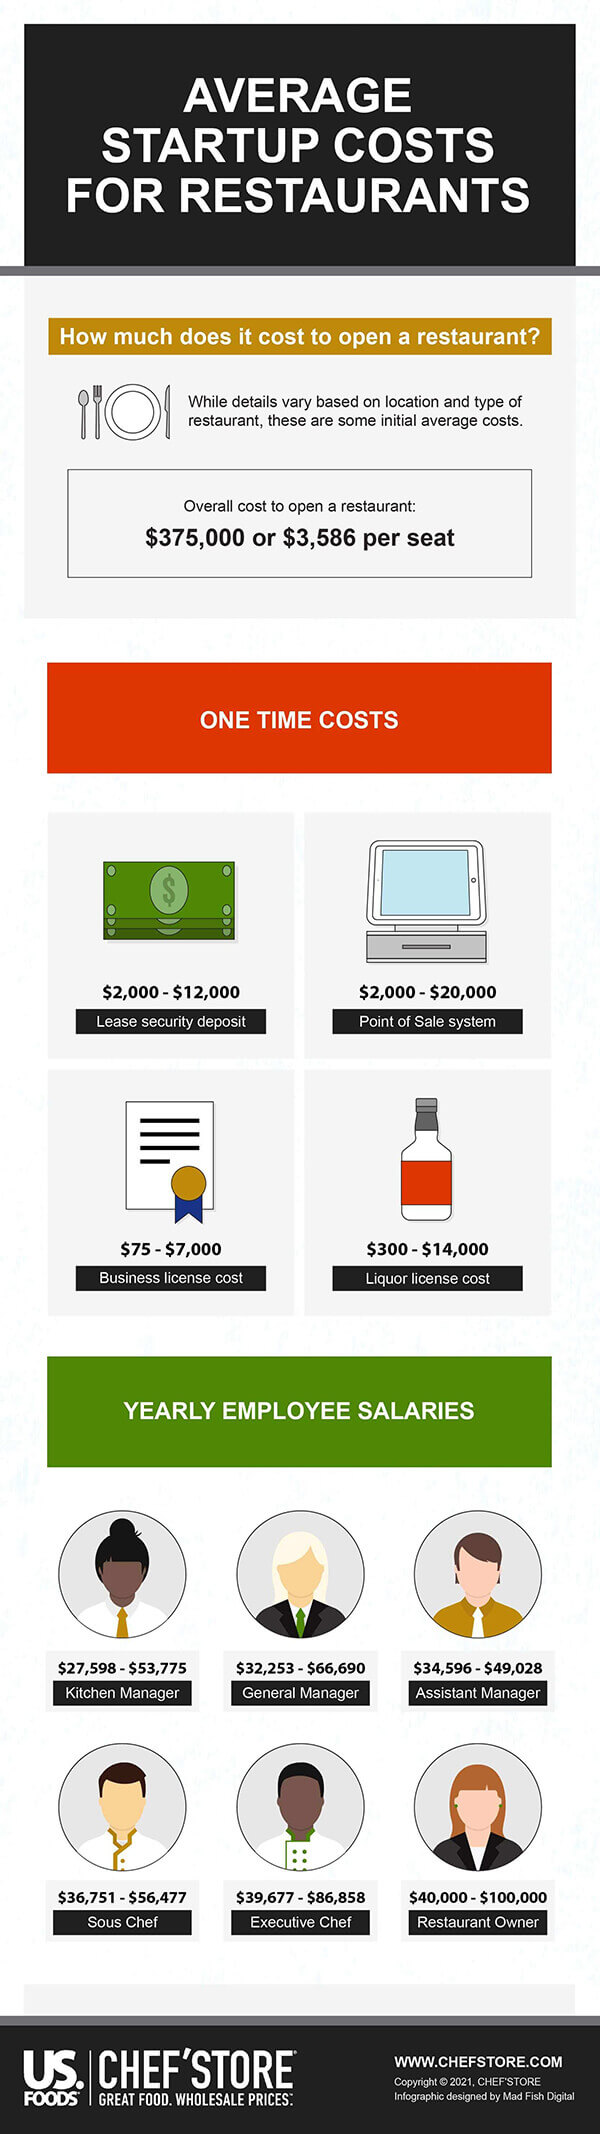 Startup Cost For Restaurants Infographic